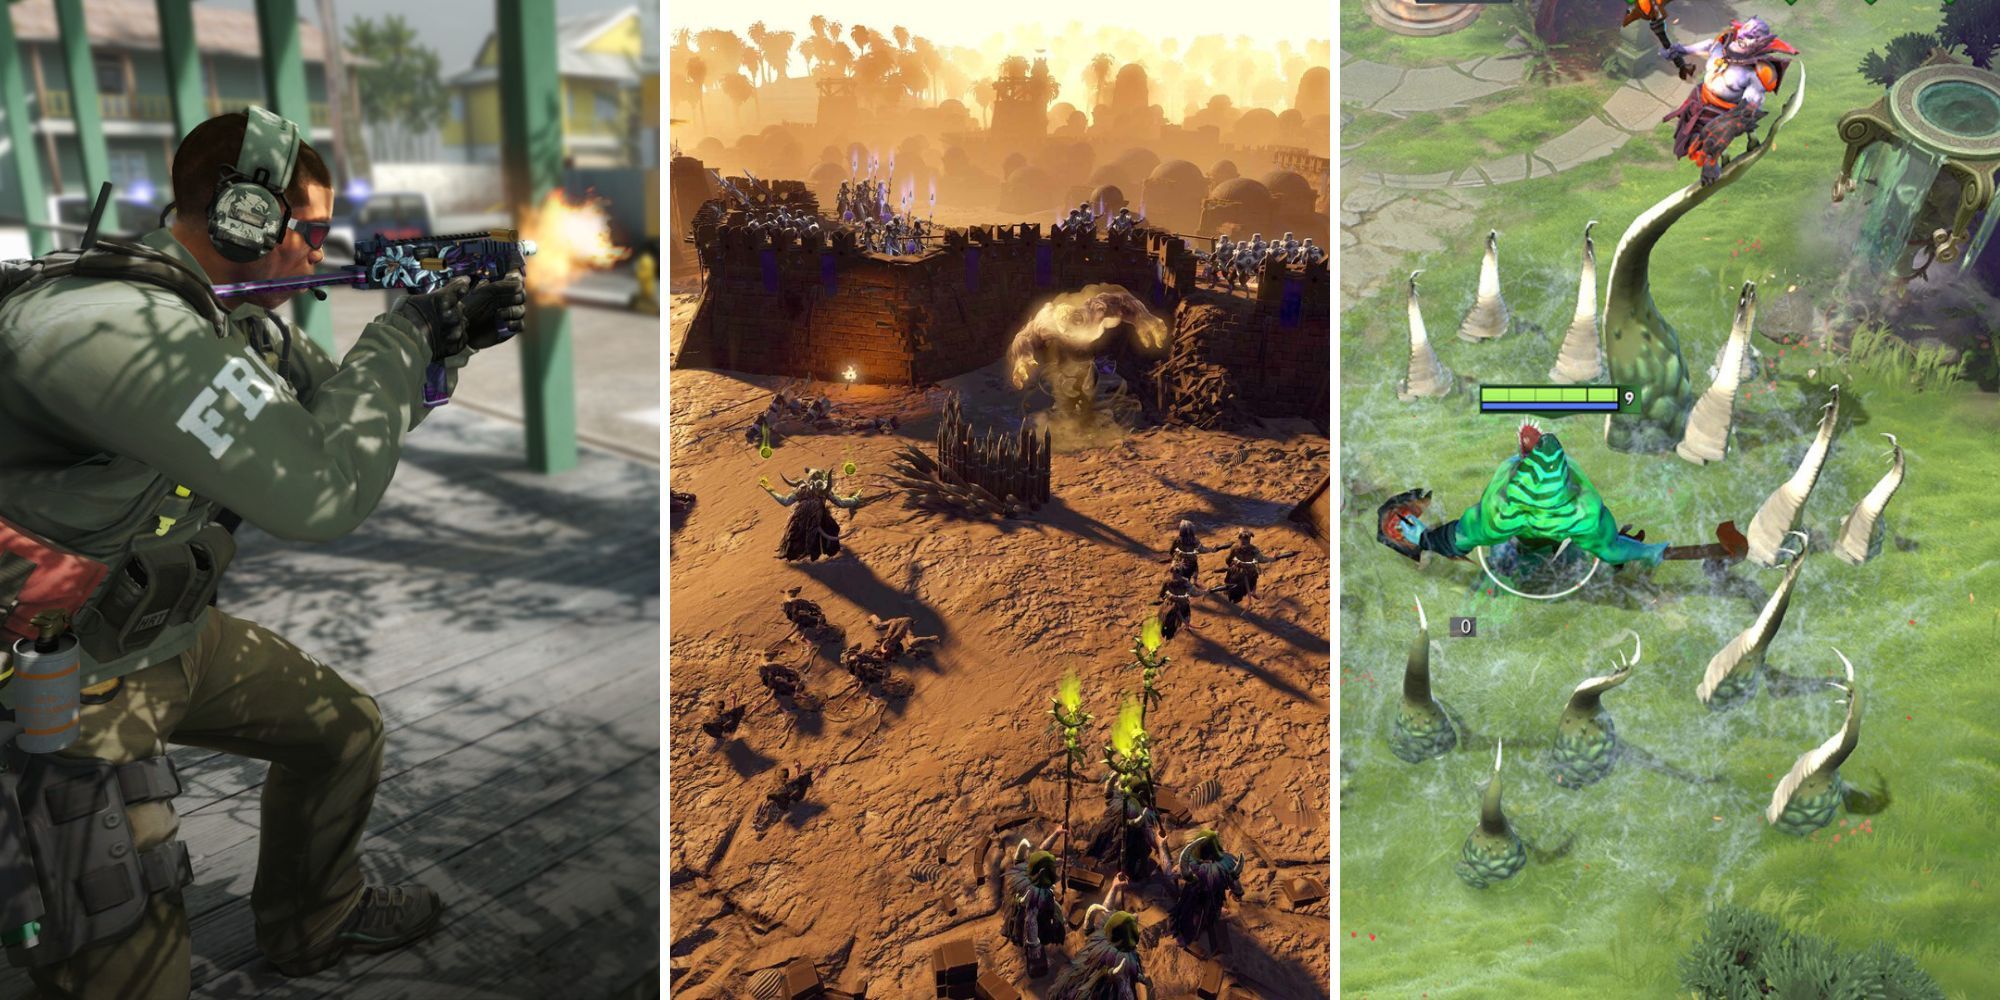 A grid showing the images for three PvP strategy games called Counter-Strike: Global Offensive, Age of Wonders 4, and Dota 2